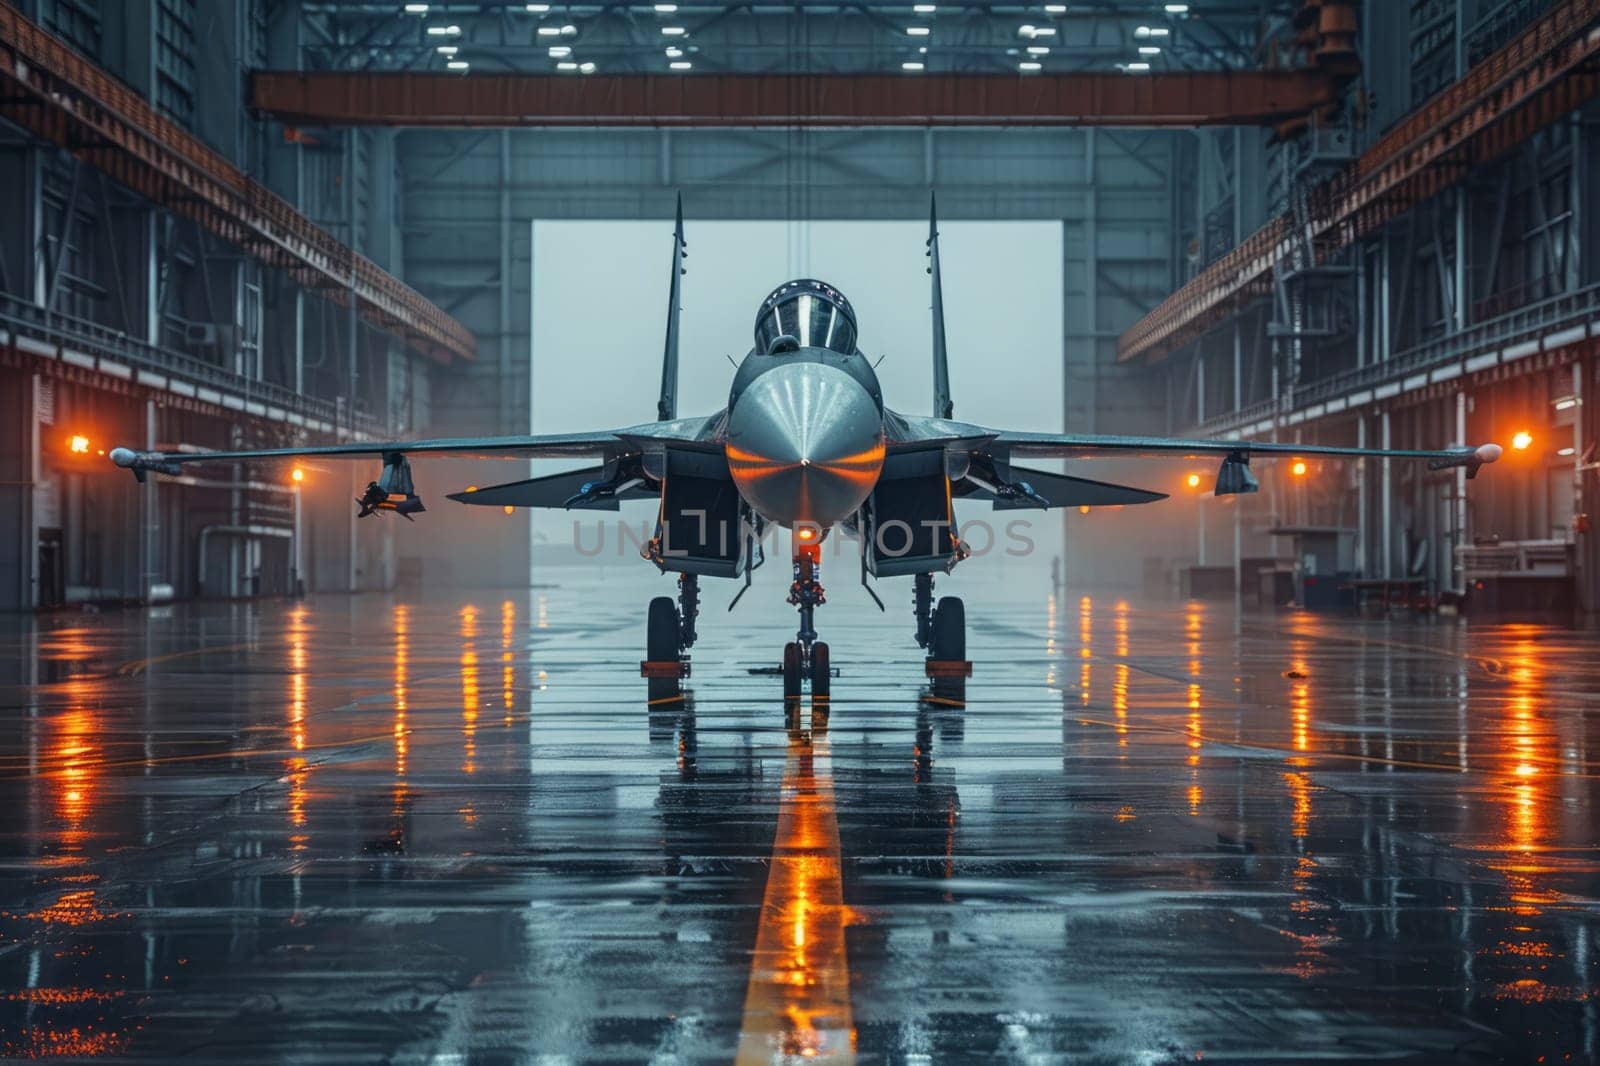 A military aircraft, specifically a fighter jet, is stored in a hangar at an aerospace manufacturers building